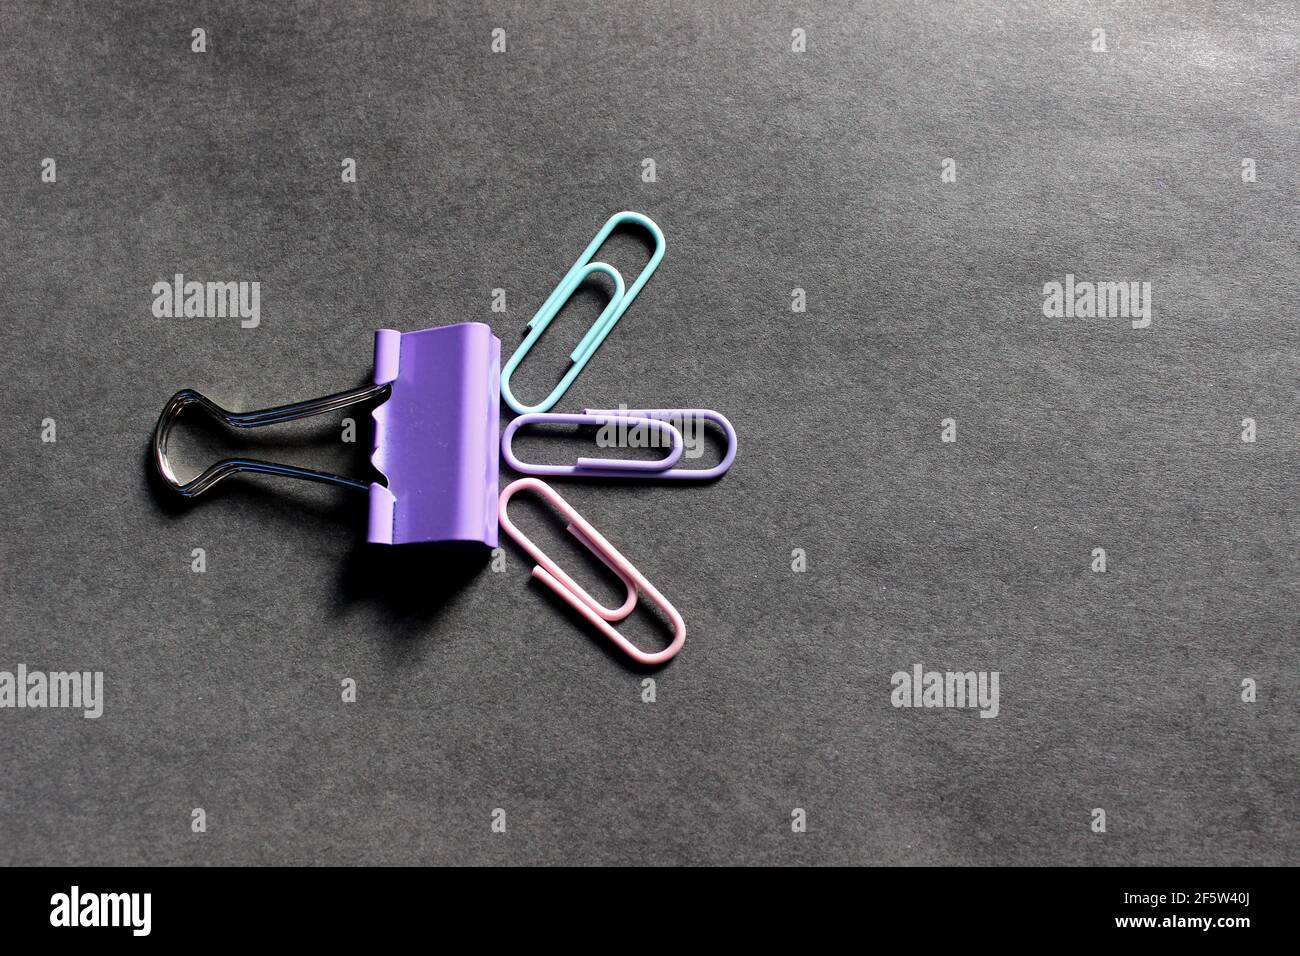 Multicolored paper clips on a dark background Stock Photo